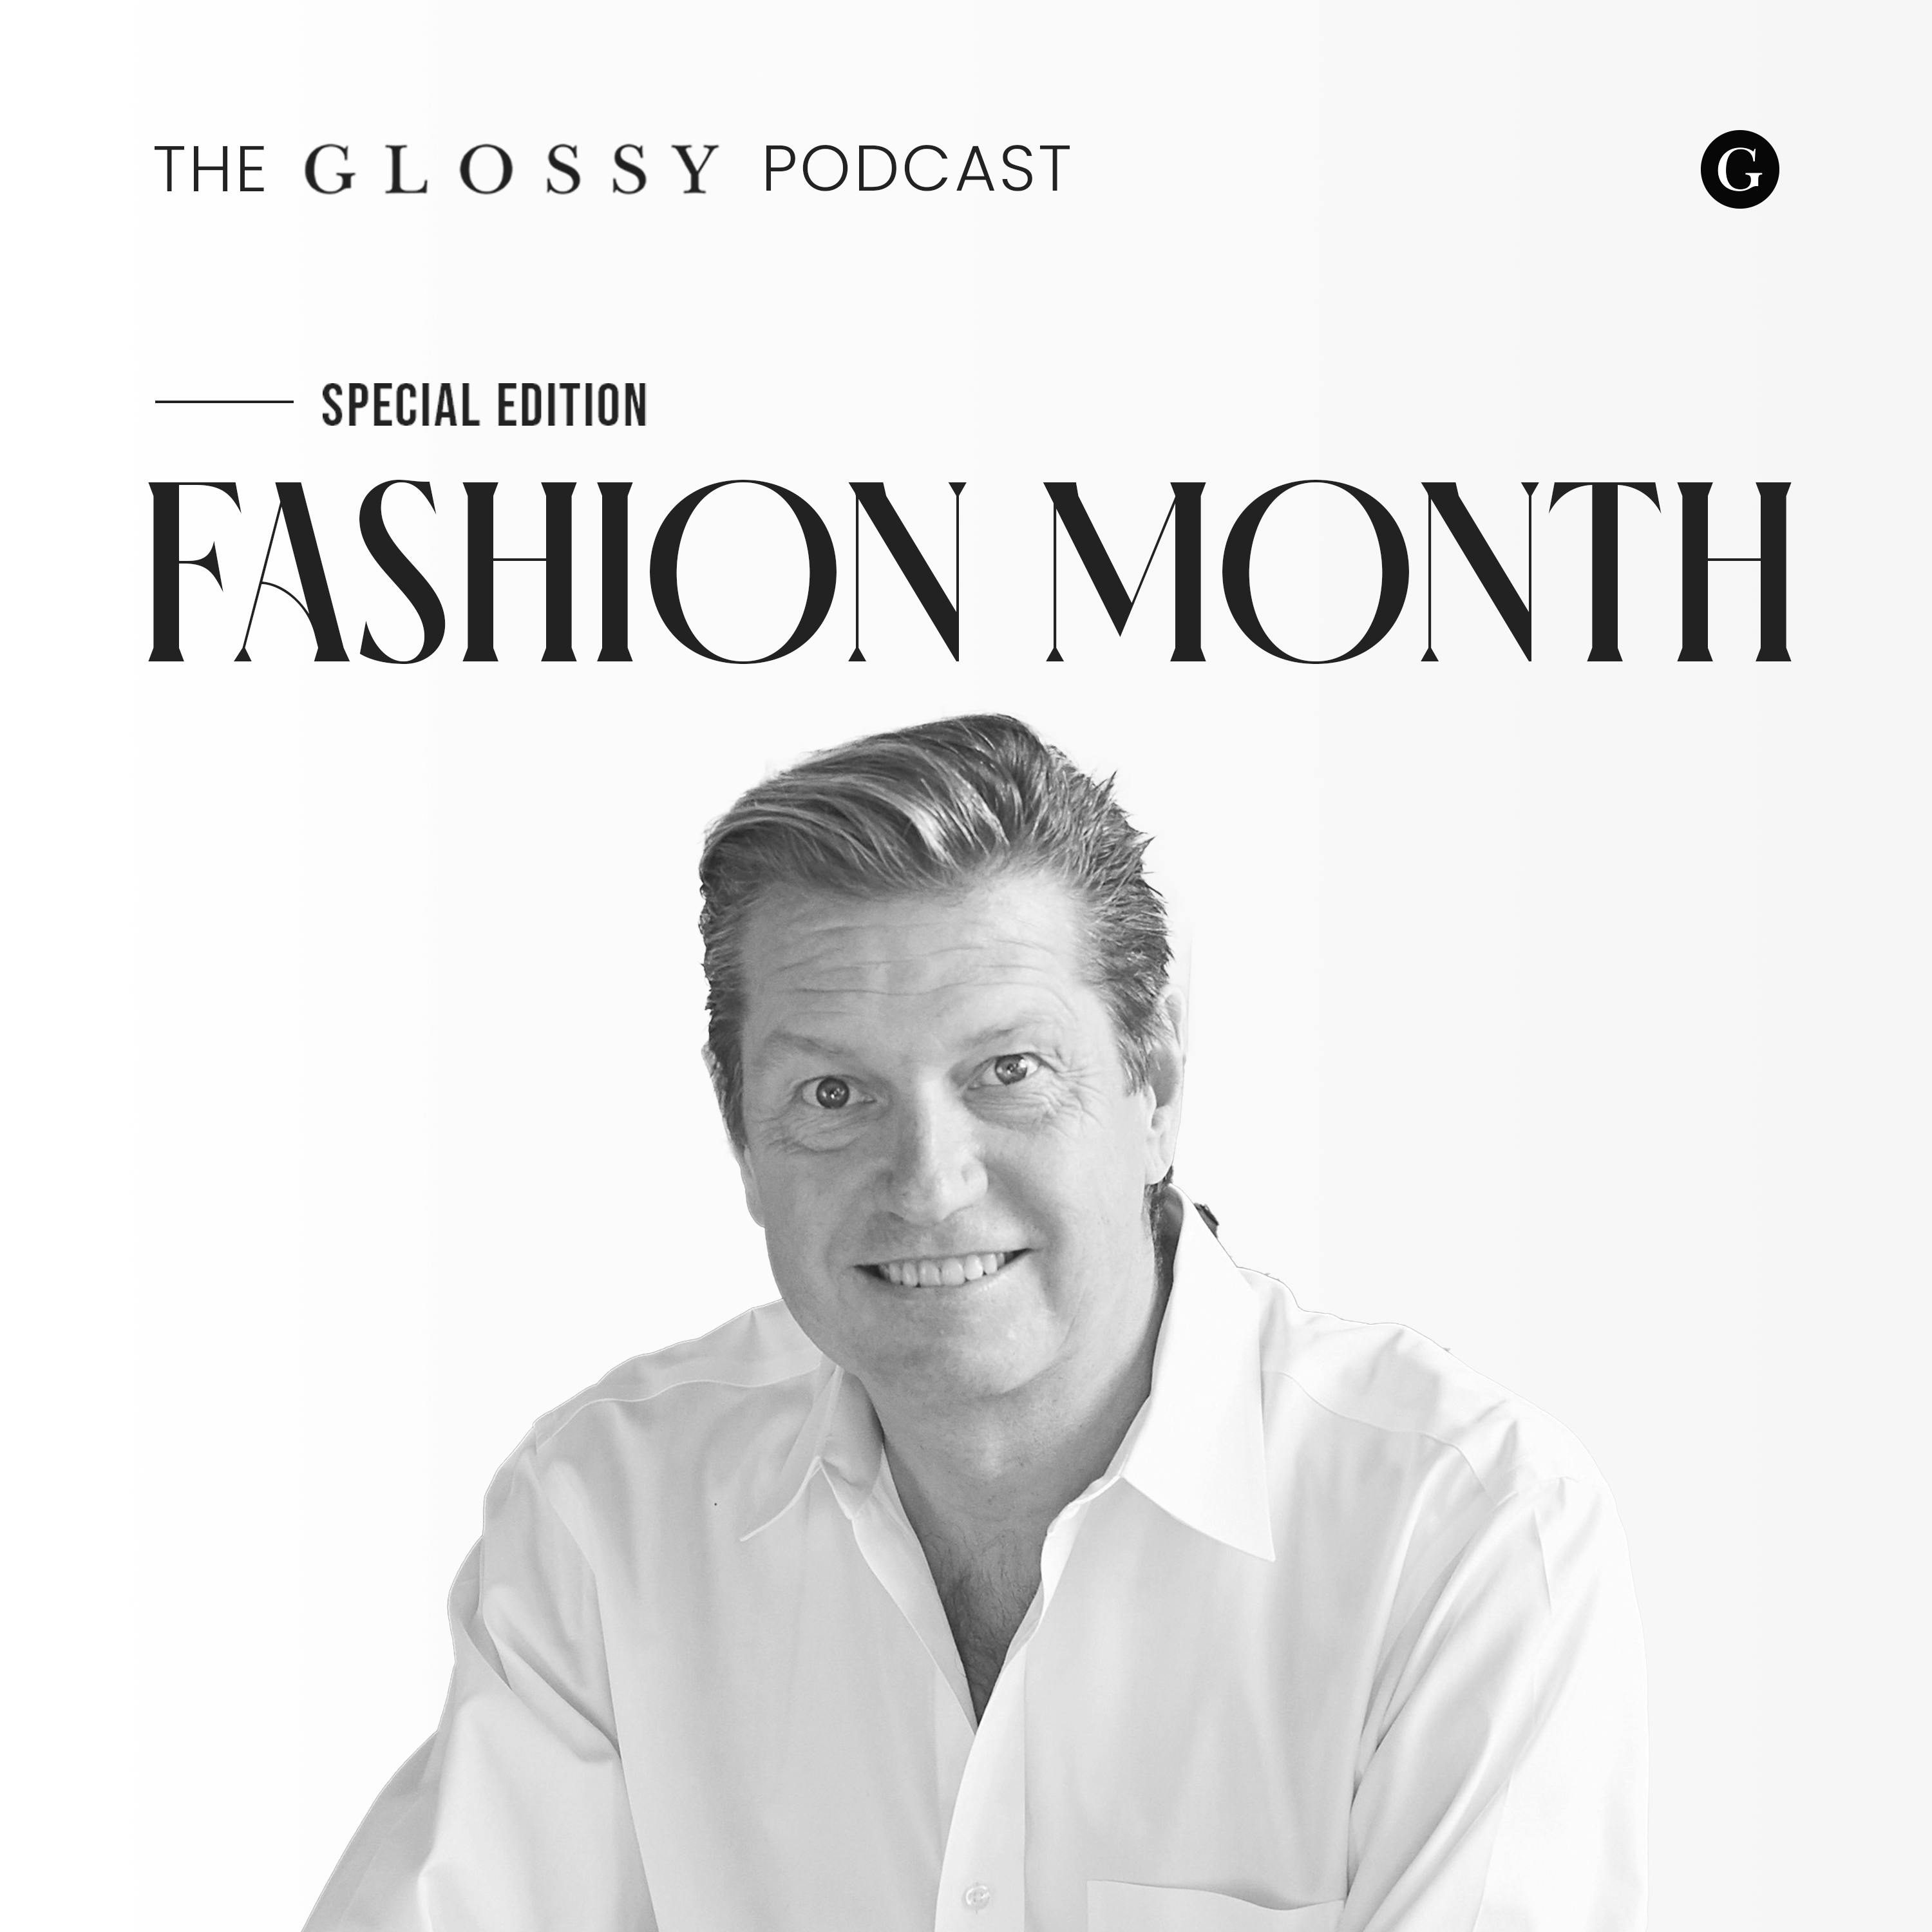 New York Fashion Week Edition: Badgley Mischka’s James Mischka - Getting our collection in front of influencers is ‘the most important thing’